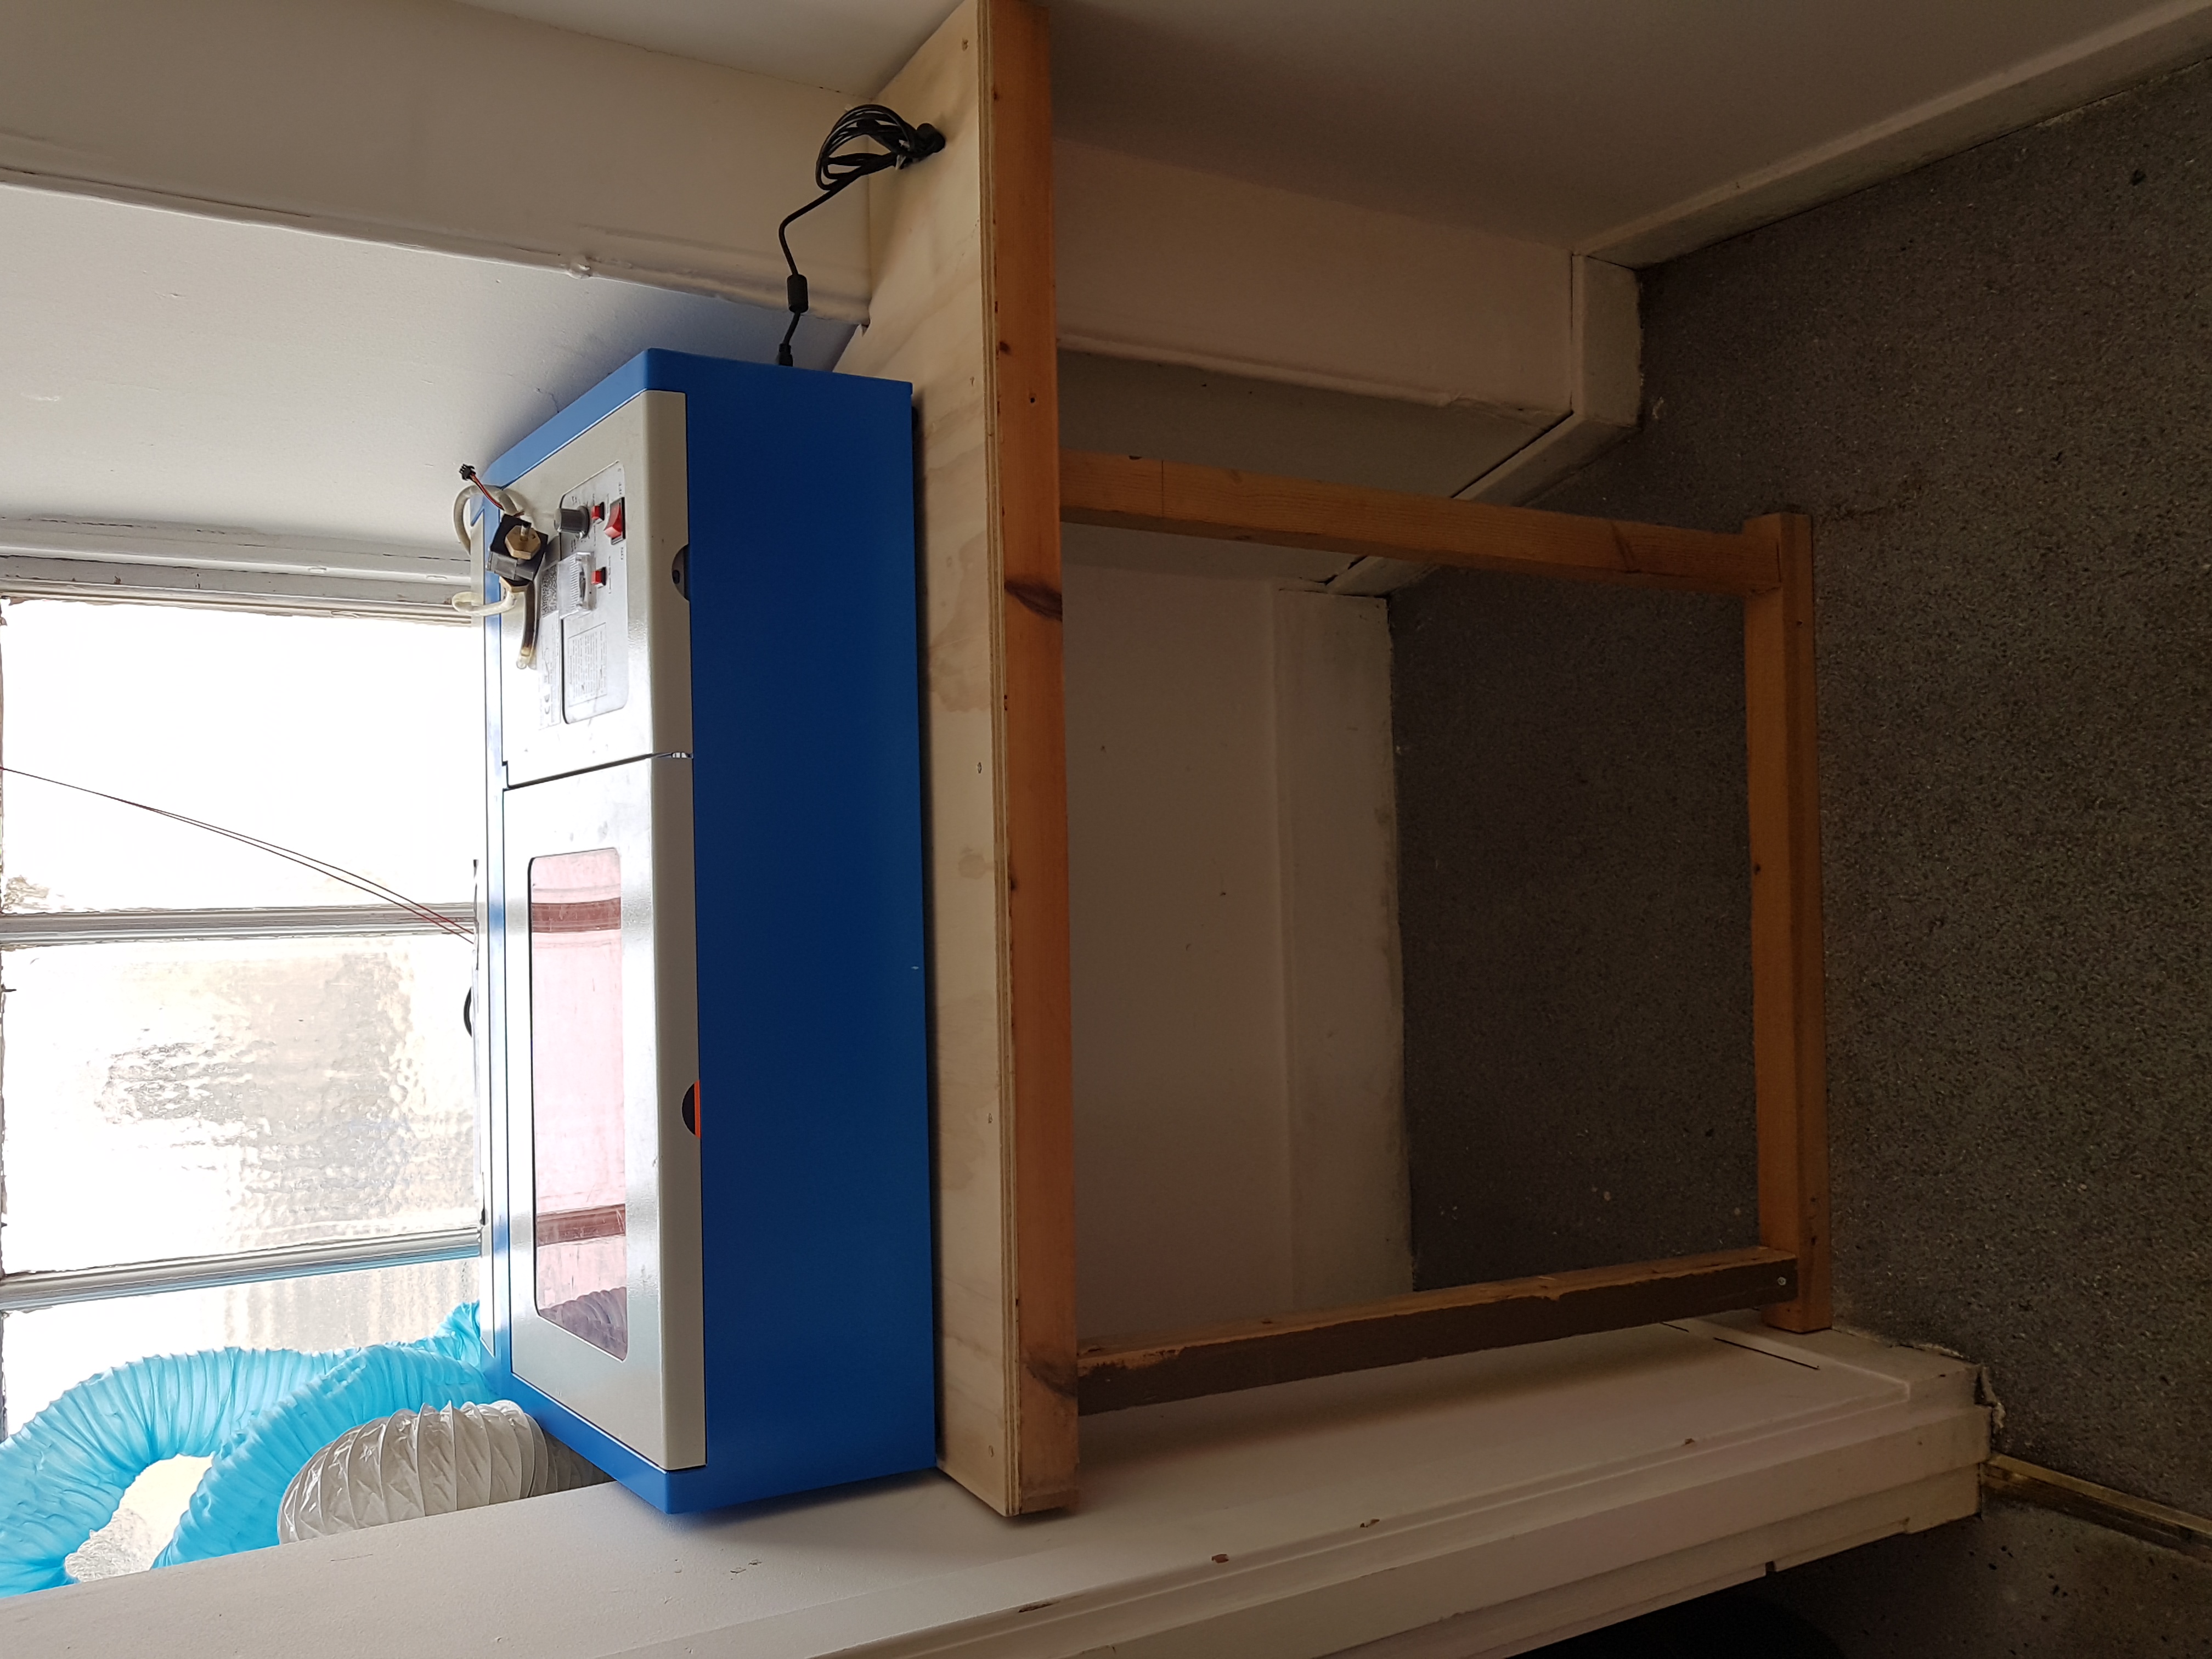 Test-fitted on wooded shelving